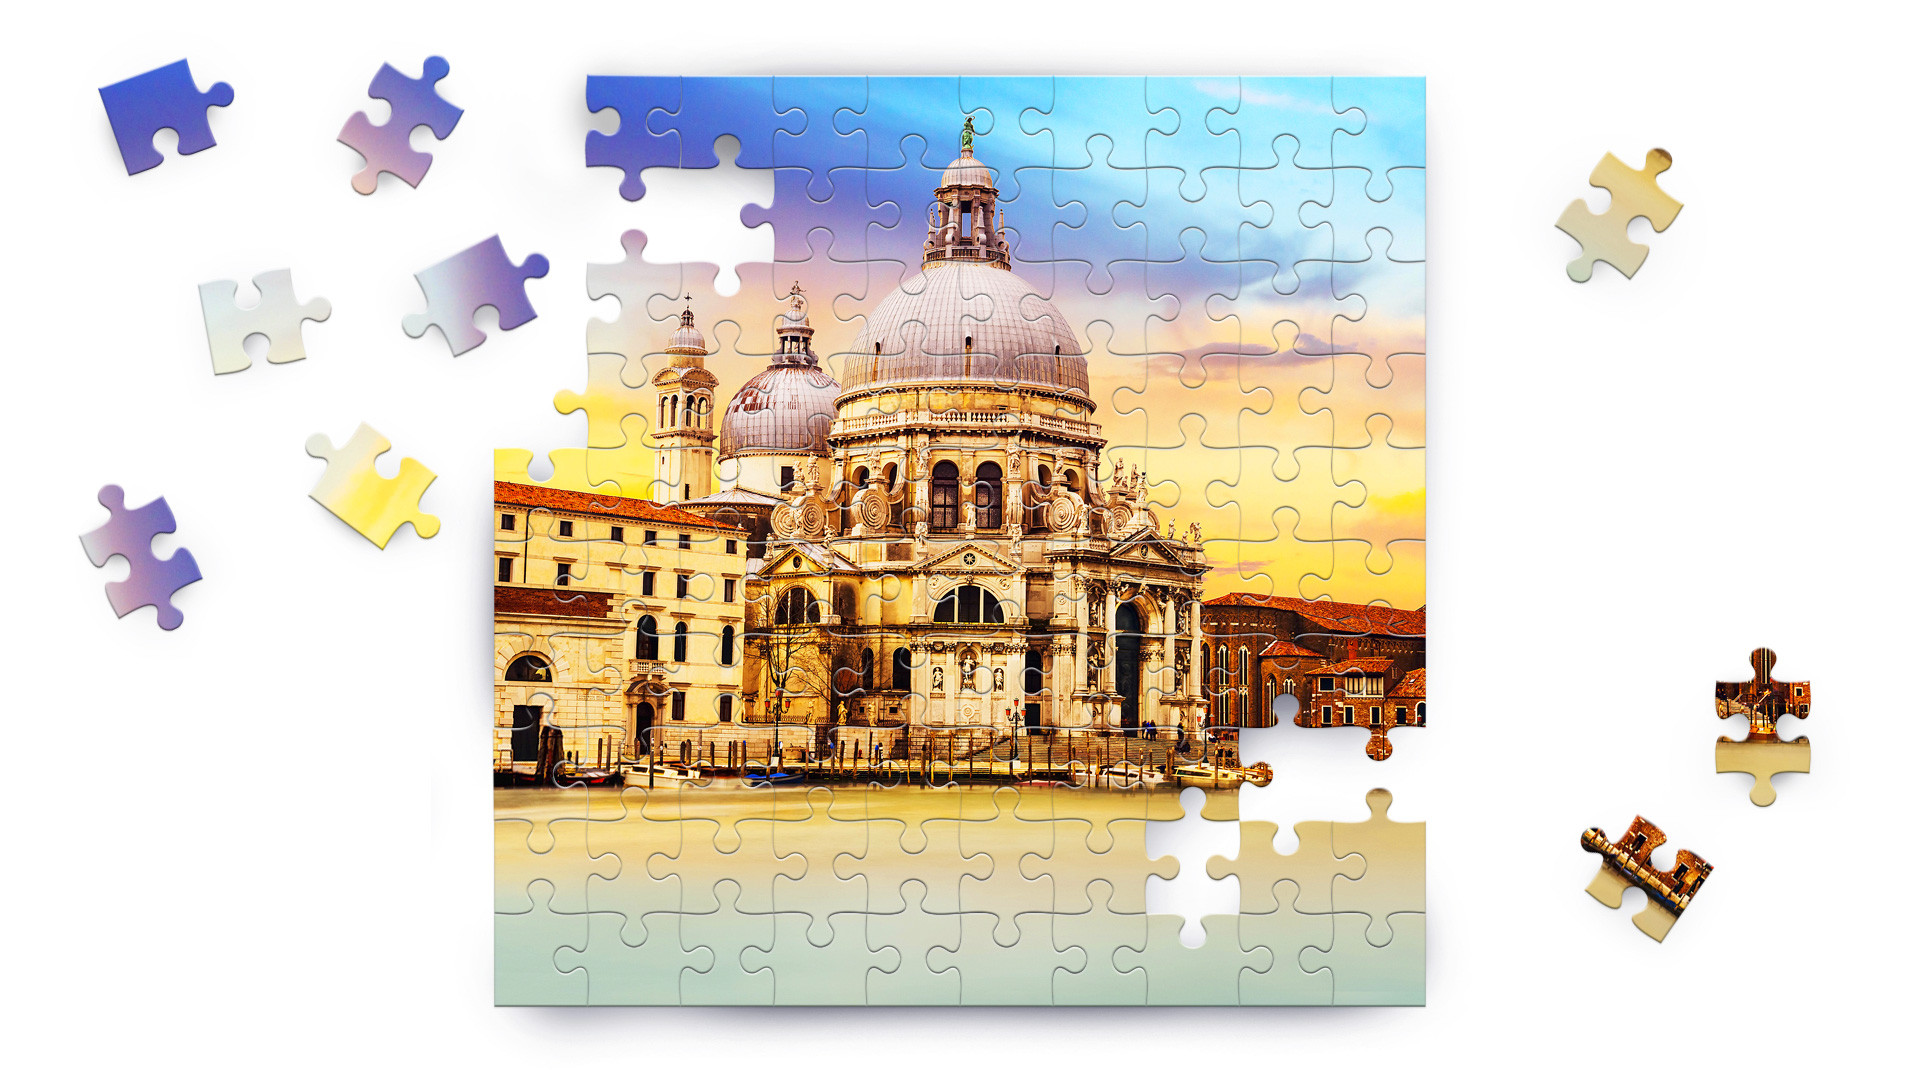 Jigsaw Puzzles by Easybrain now comes to Google Play